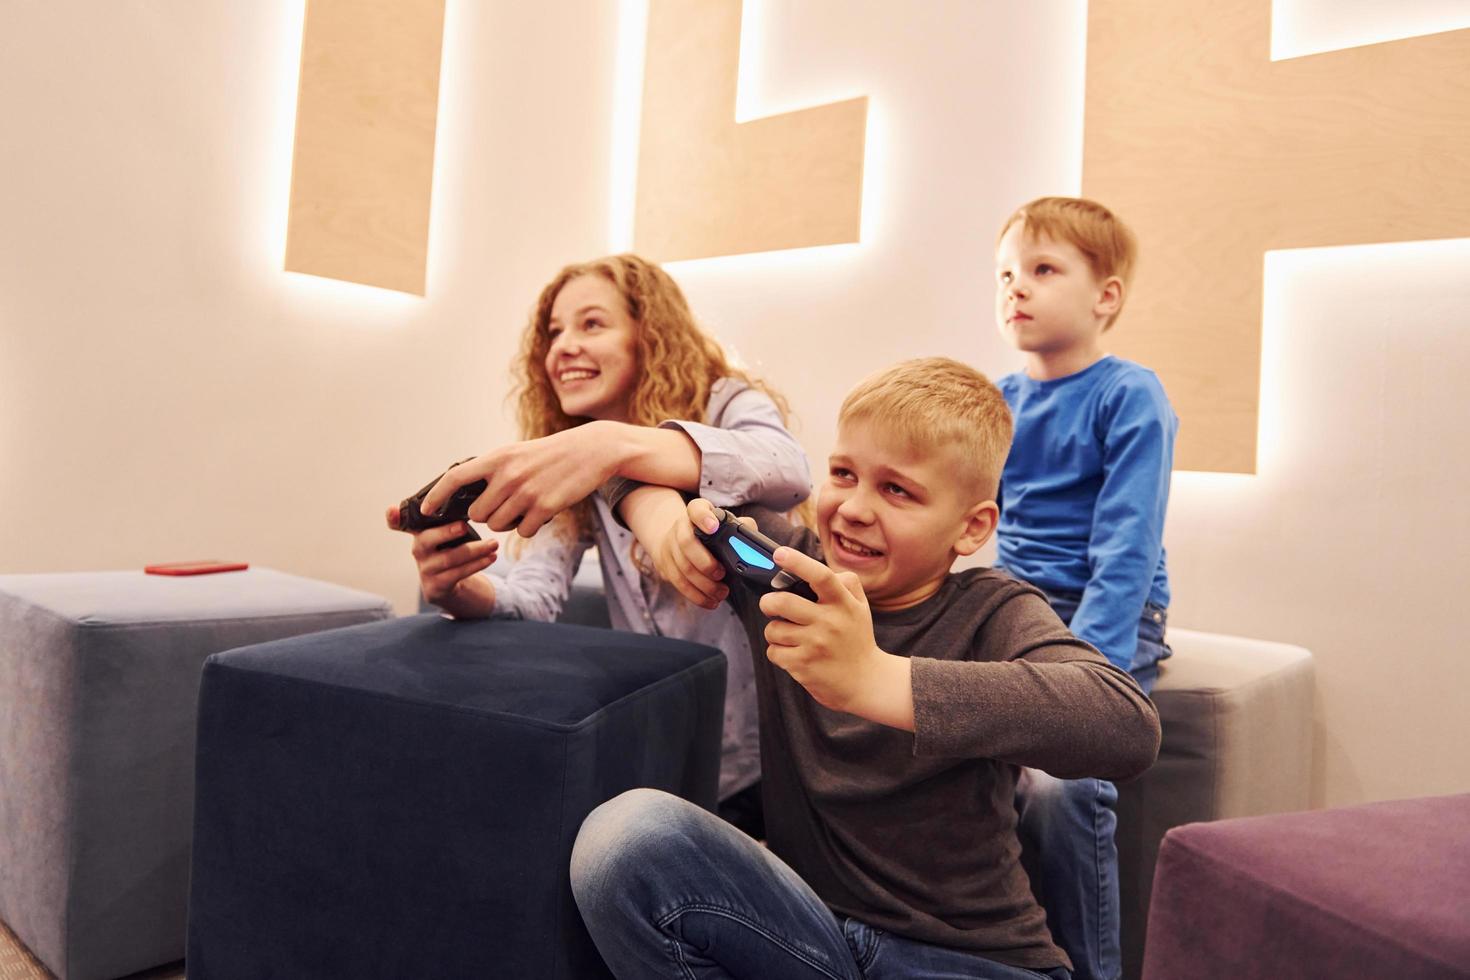 Cheerful kids sitting indoors and playing video games together photo